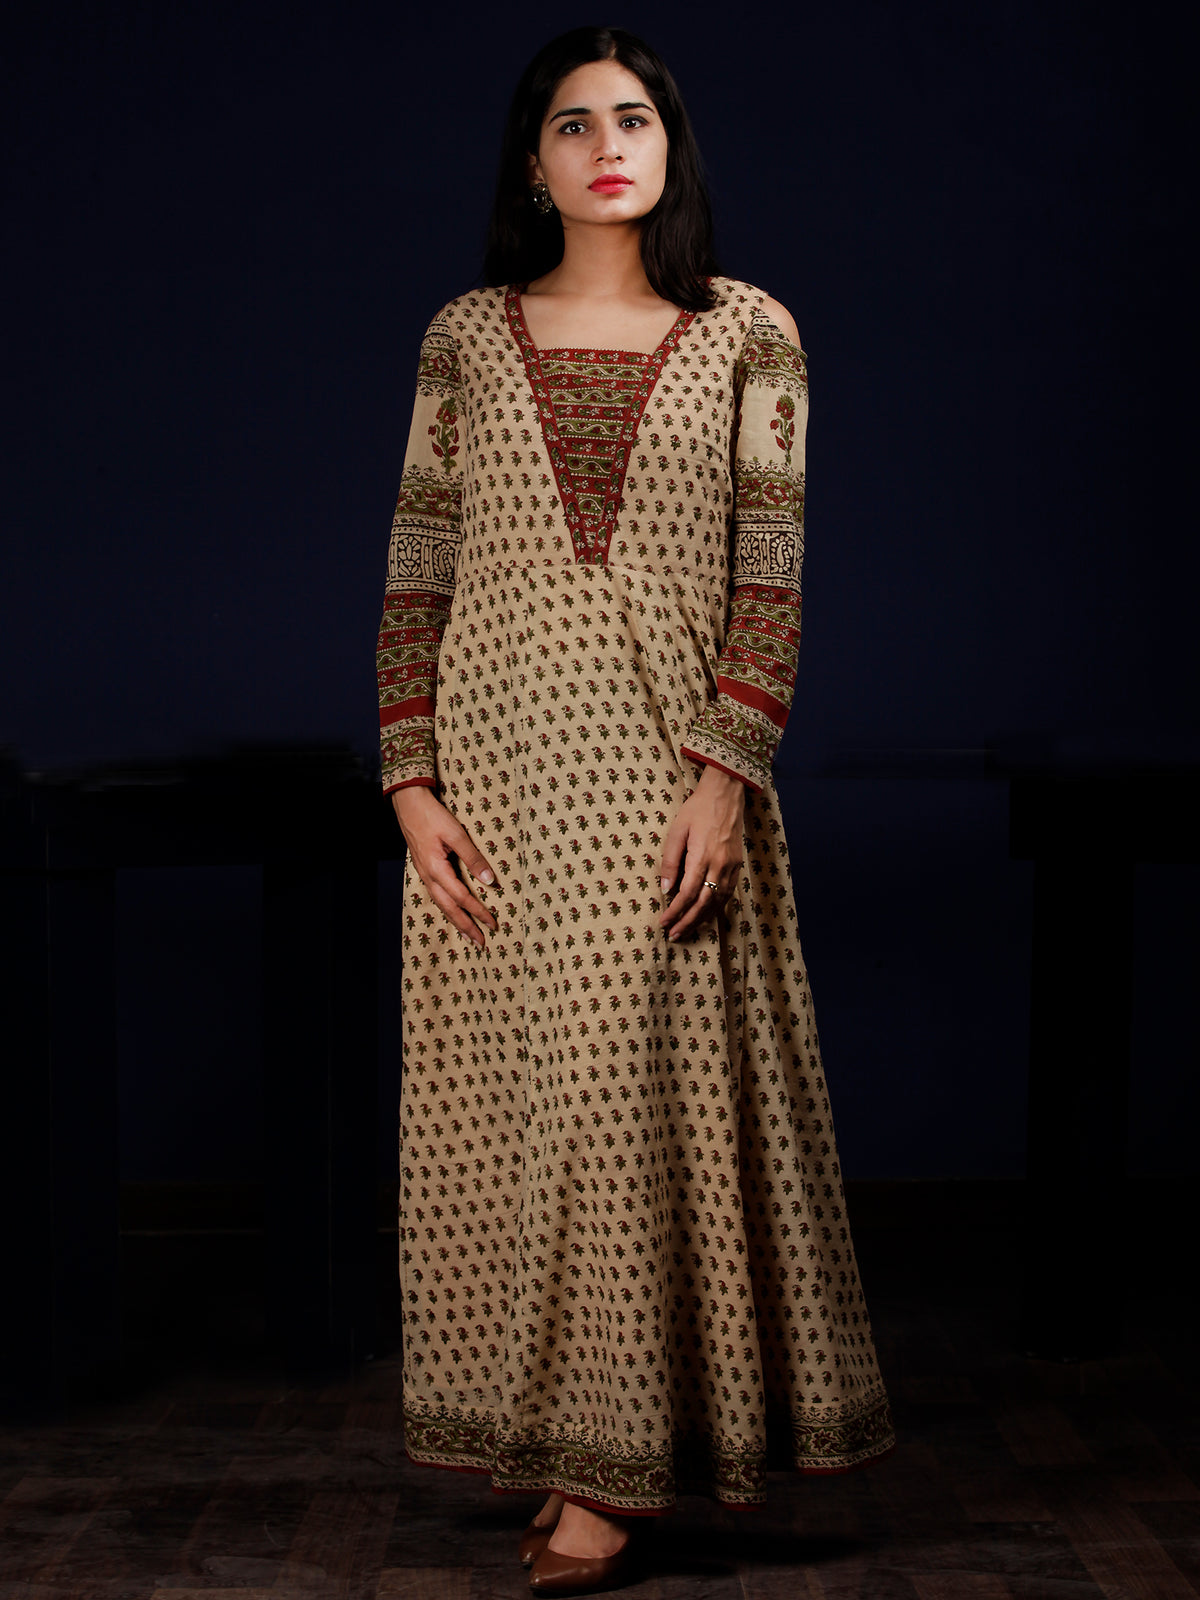 Naaz Kainaz - Beige Maroon Green Black Hand Block Printed Long Cotton Dress With Cold Shoulder Sleeves - DS62F001